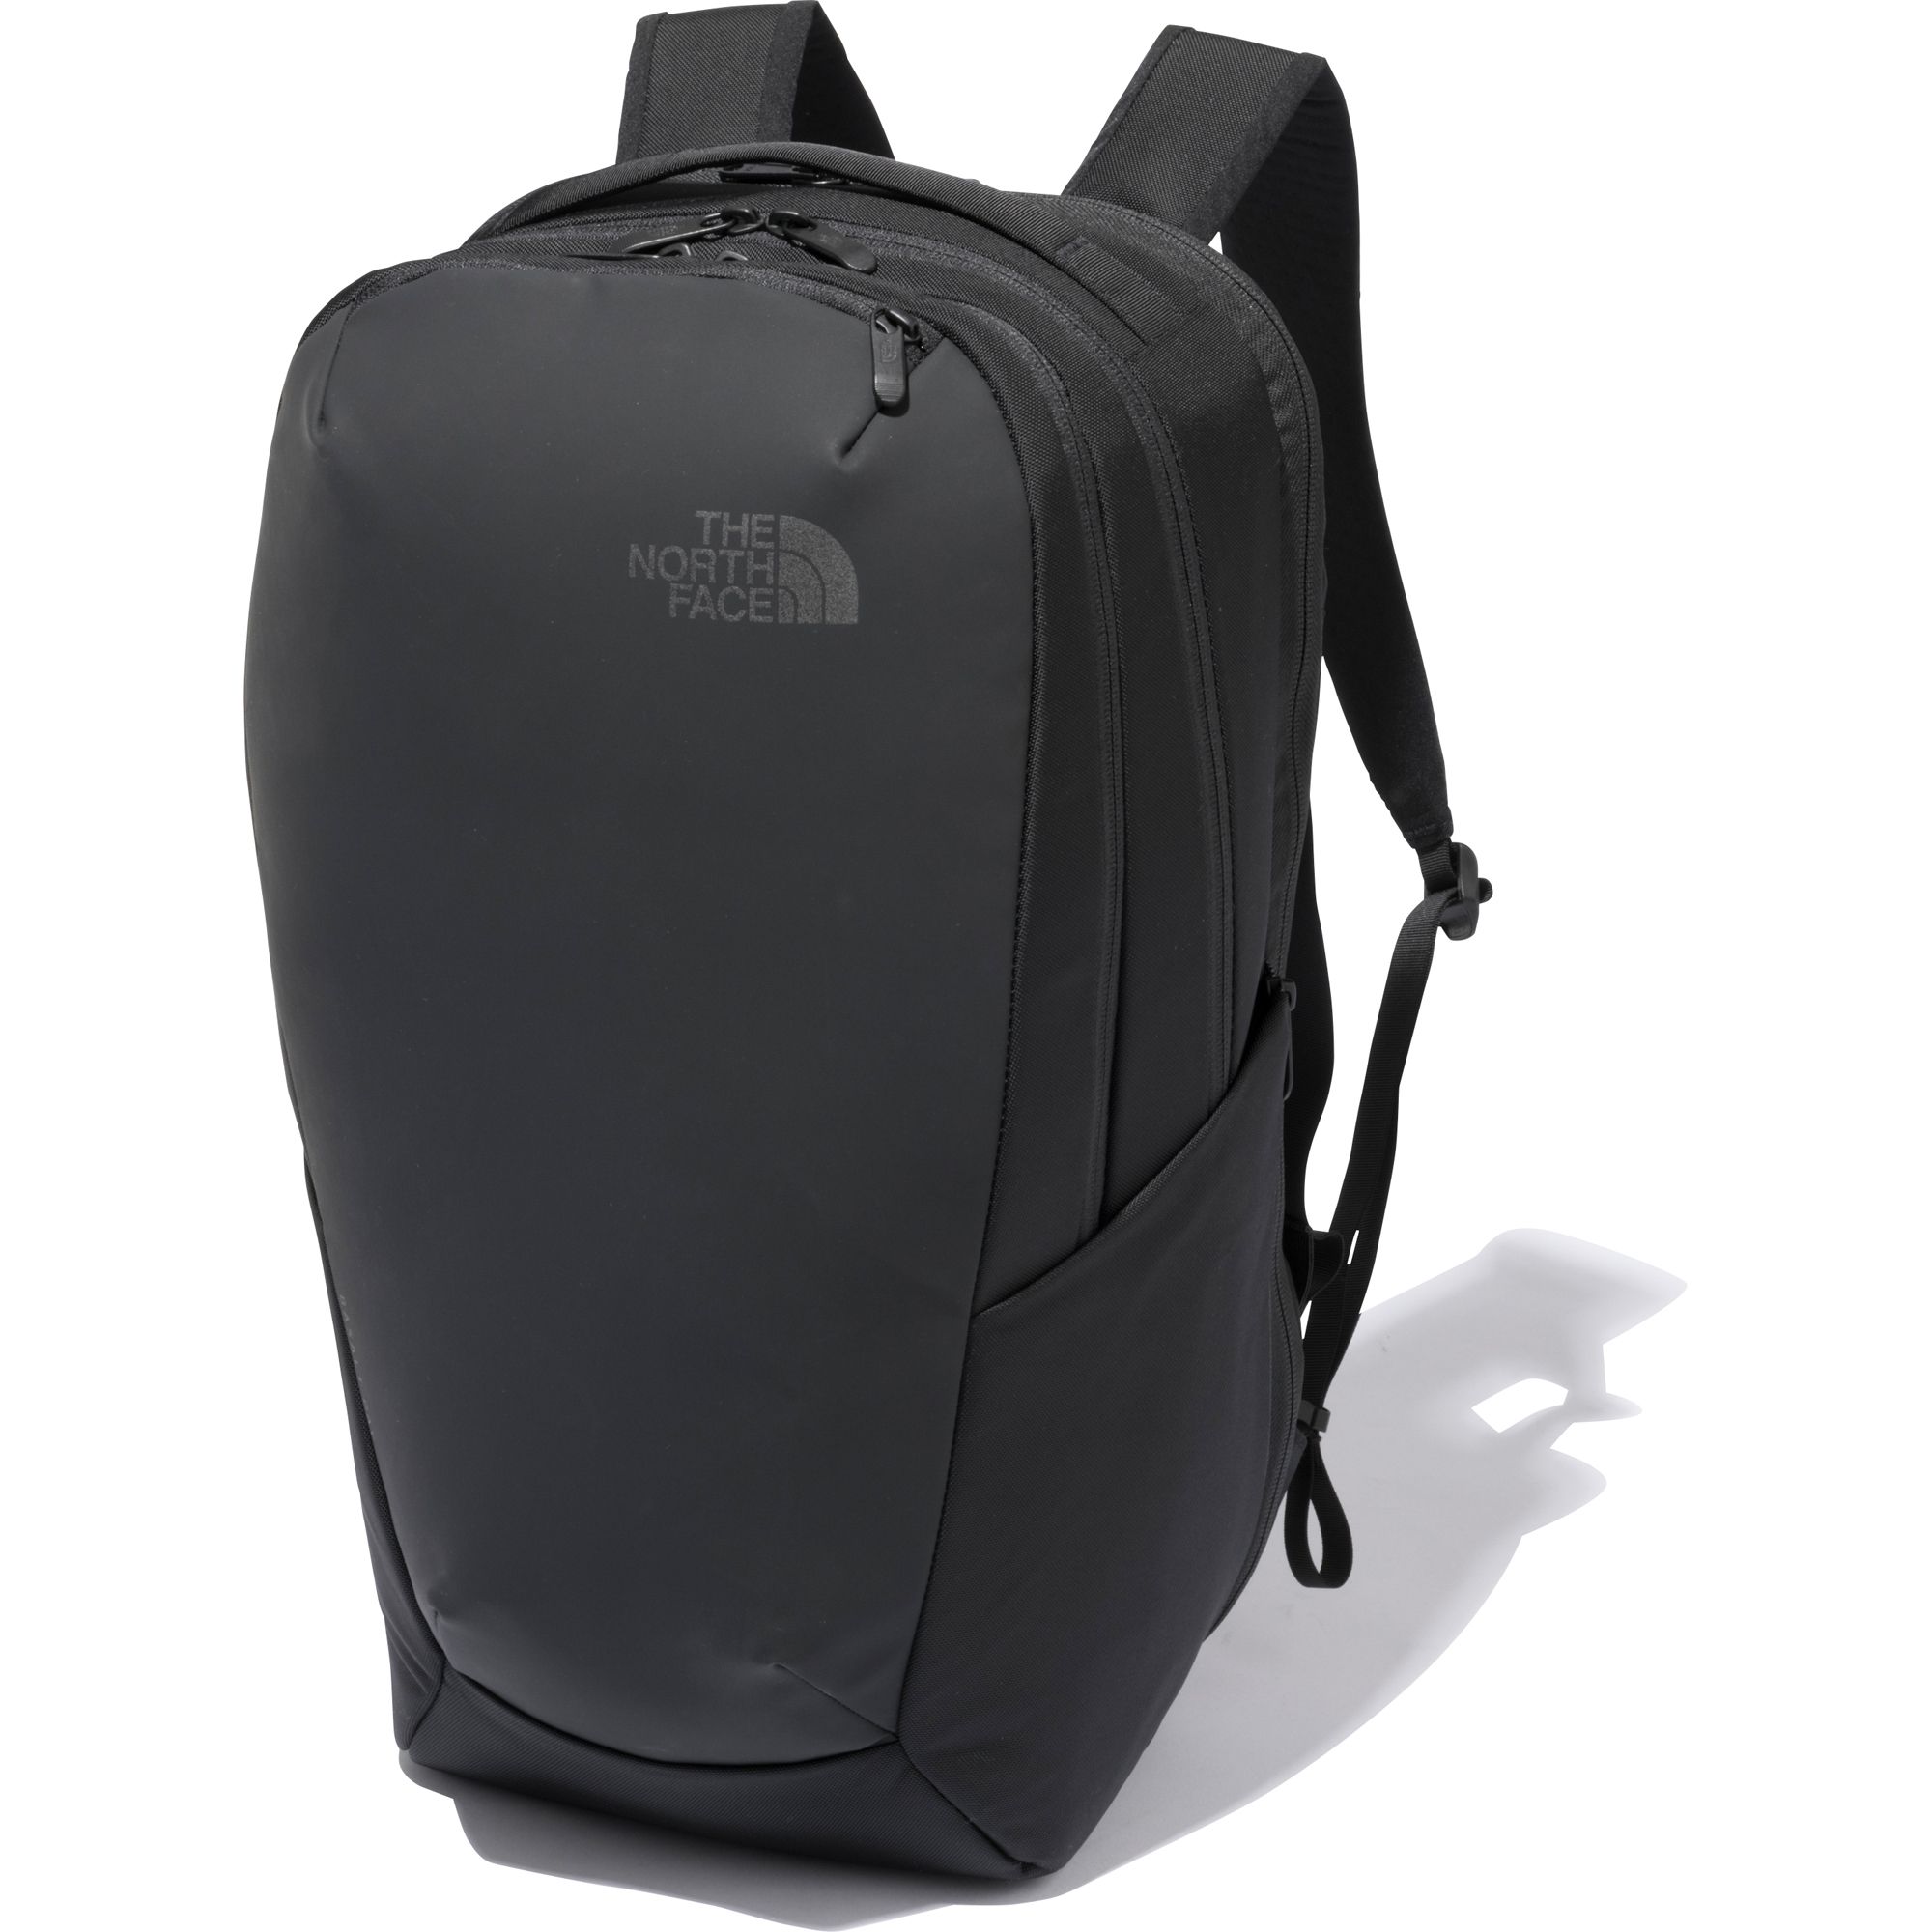 PCバッグの新定番。THE NORTH FACE「Shuttle Daypack」を徹底解説 